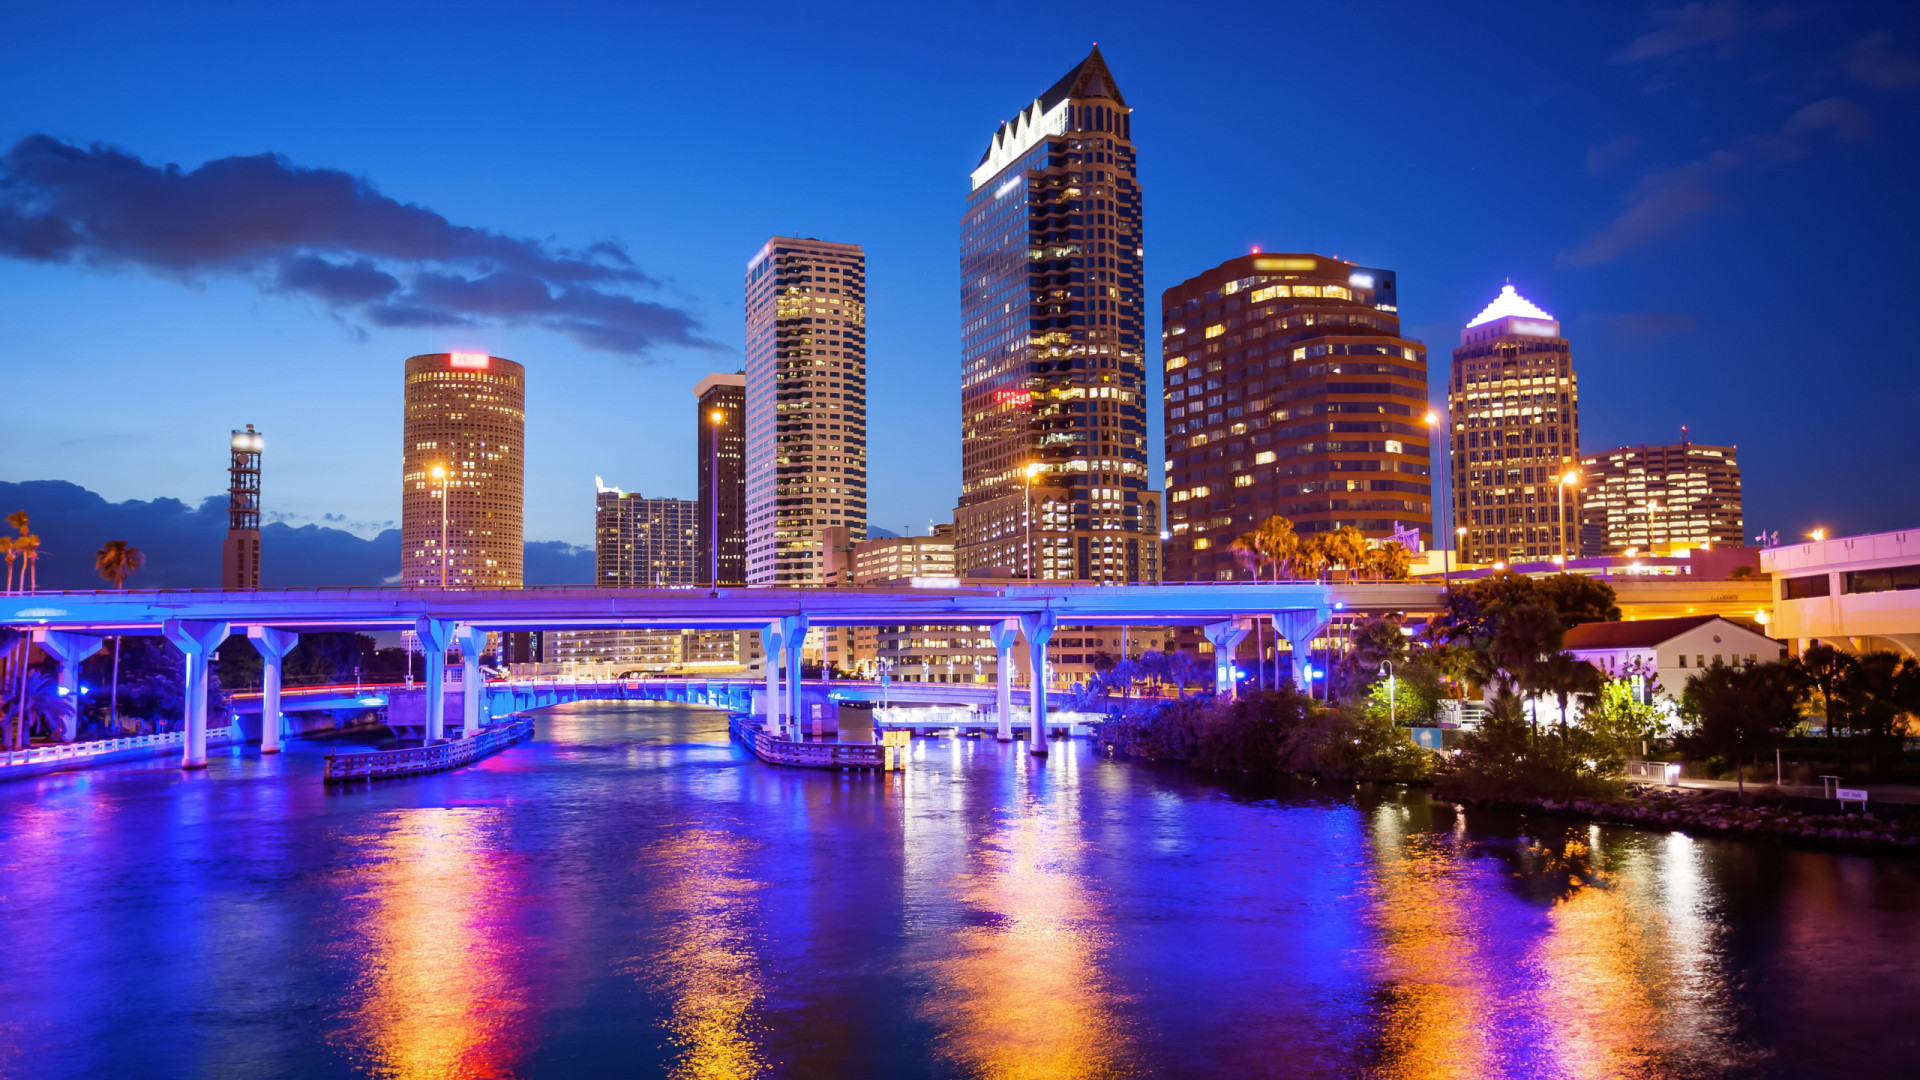 <p>Tampa, scoring 59.4 on the rent index, is known for its port and rich cultural history. This coastal city combines business with leisure, offering a lively yet expensive lifestyle.</p><p><a href="https://www.msn.com/en-in/community/channel/vid-7xx8mnucu55yw63we9va2gwr7uihbxwc68fxqp25x6tg4ftibpra?cvid=94631541bc0f4f89bfd59158d696ad7e">Follow us and access great exclusive content every day</a></p>